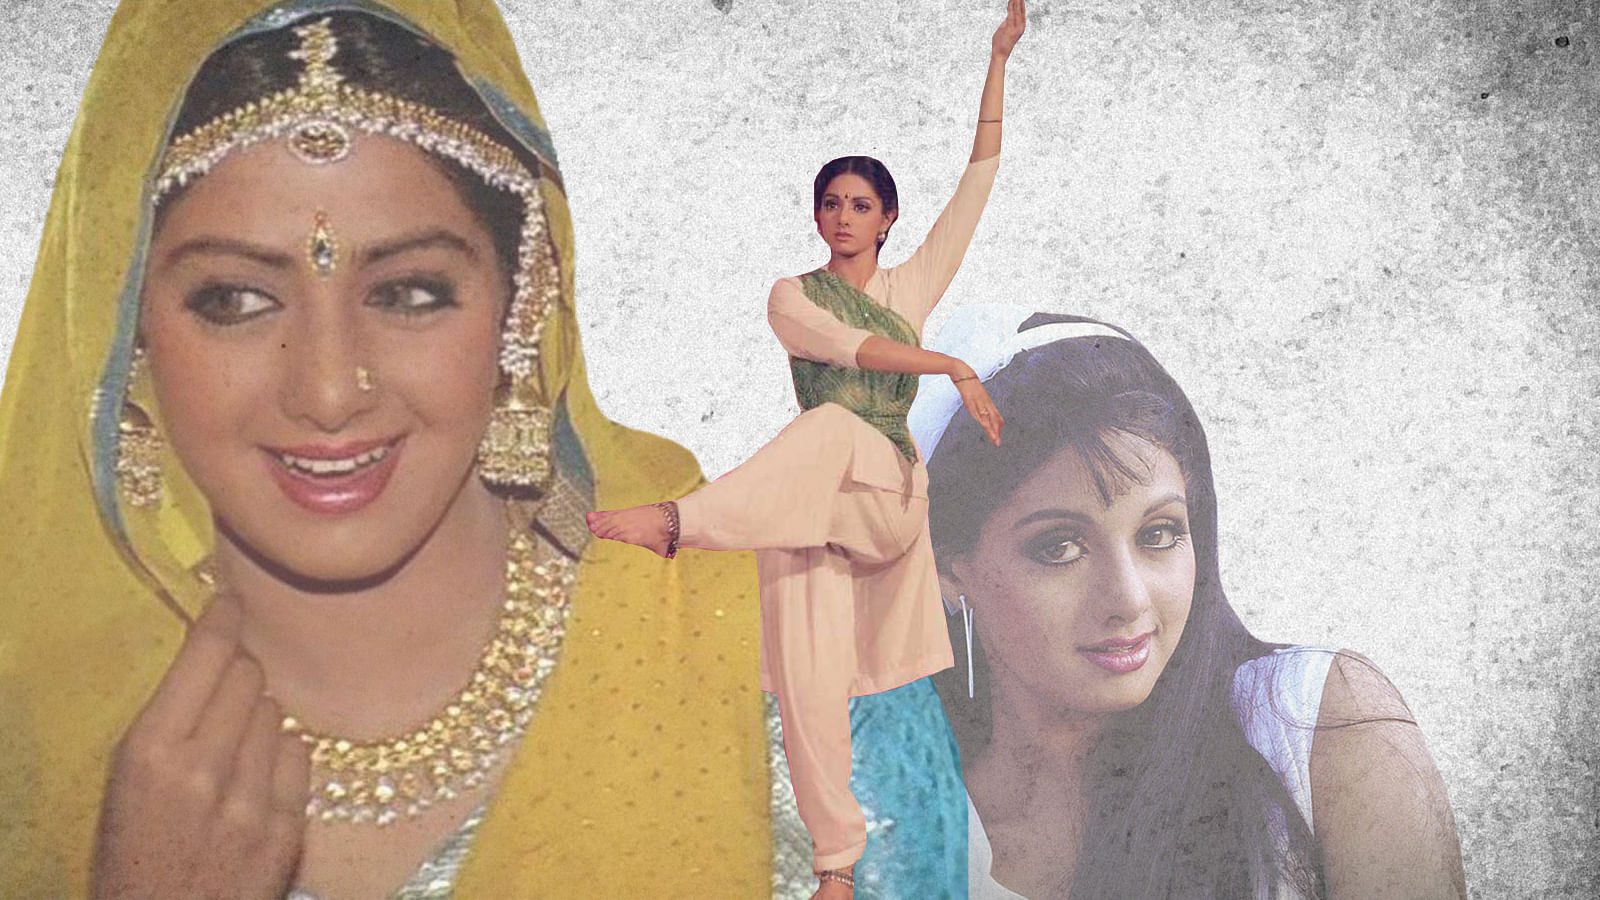 The queen of expressions, Sridevi